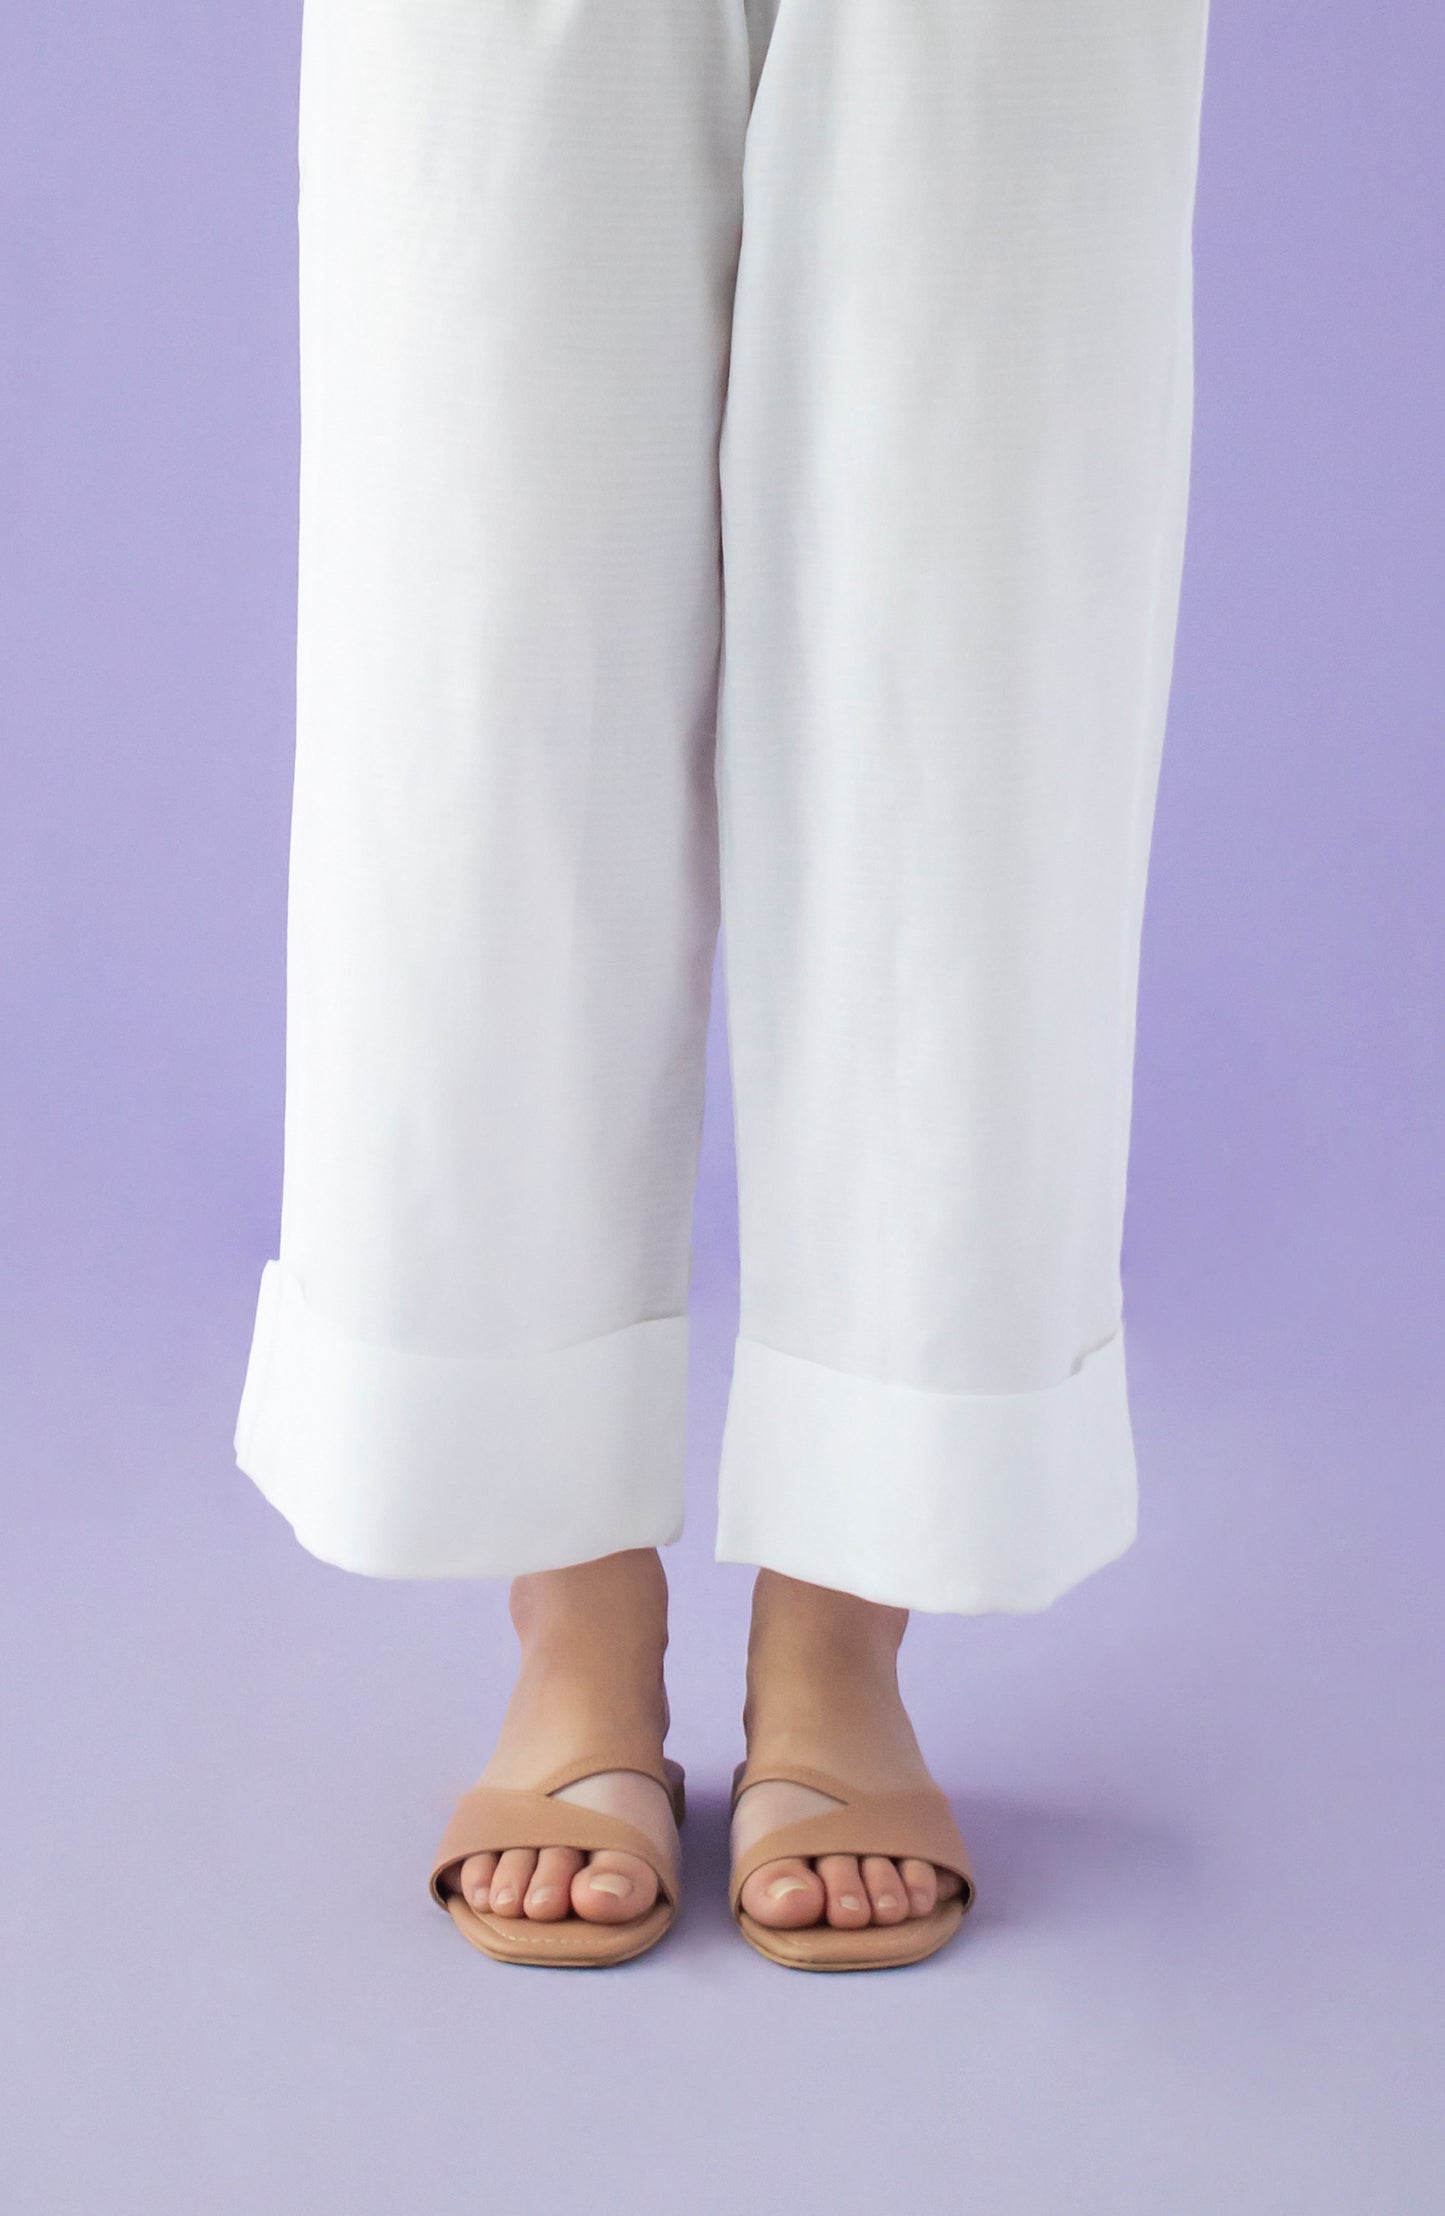 NB-T-PL-23-011 WHITE DOBBY SCTROUSER STITCHED BOTTOMS TROUSER